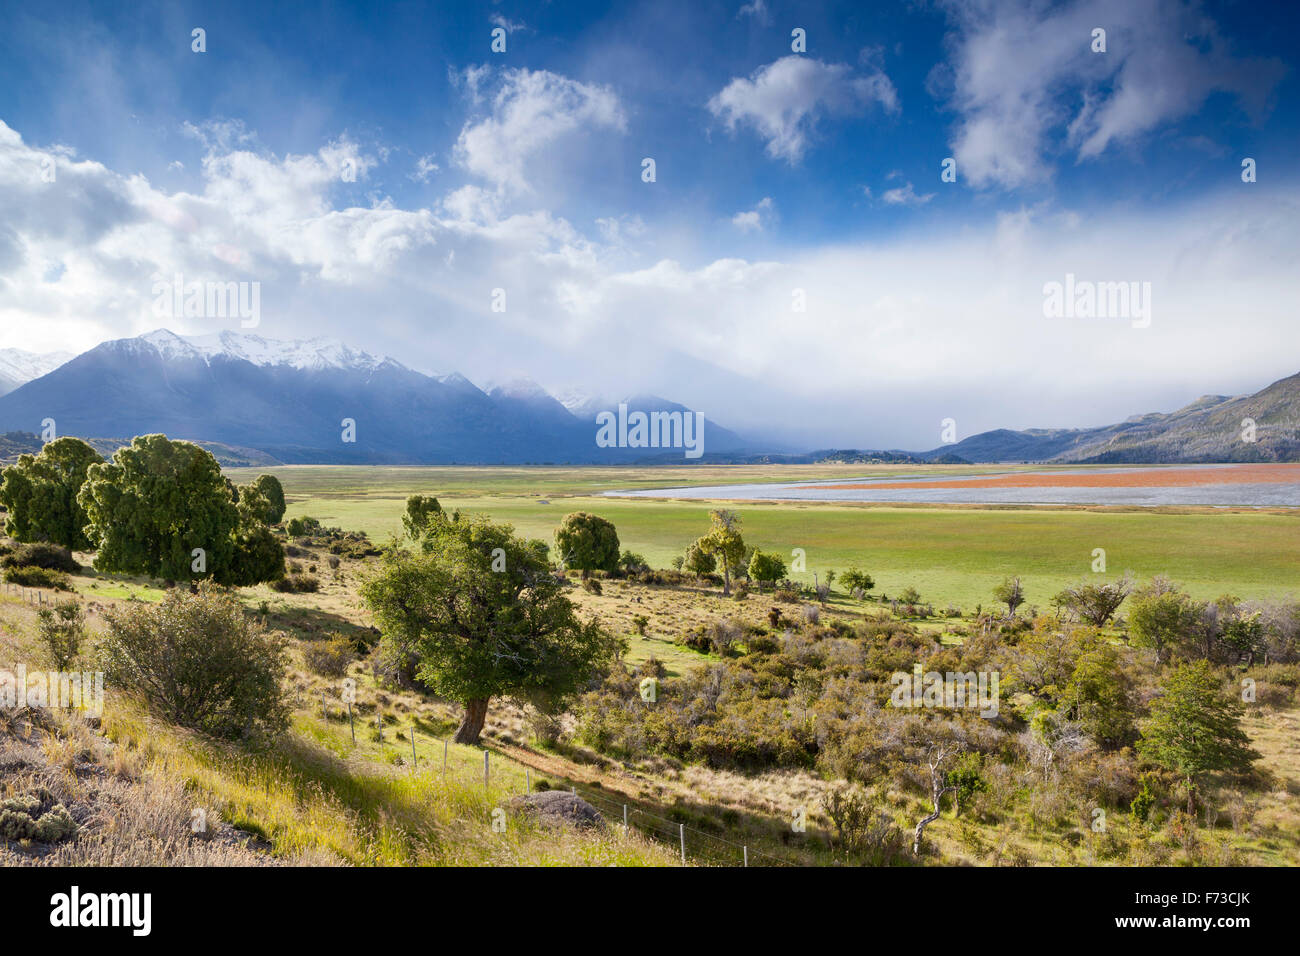 Mountainous landscape with a lake in Chubut, Patagonia Stock Photo